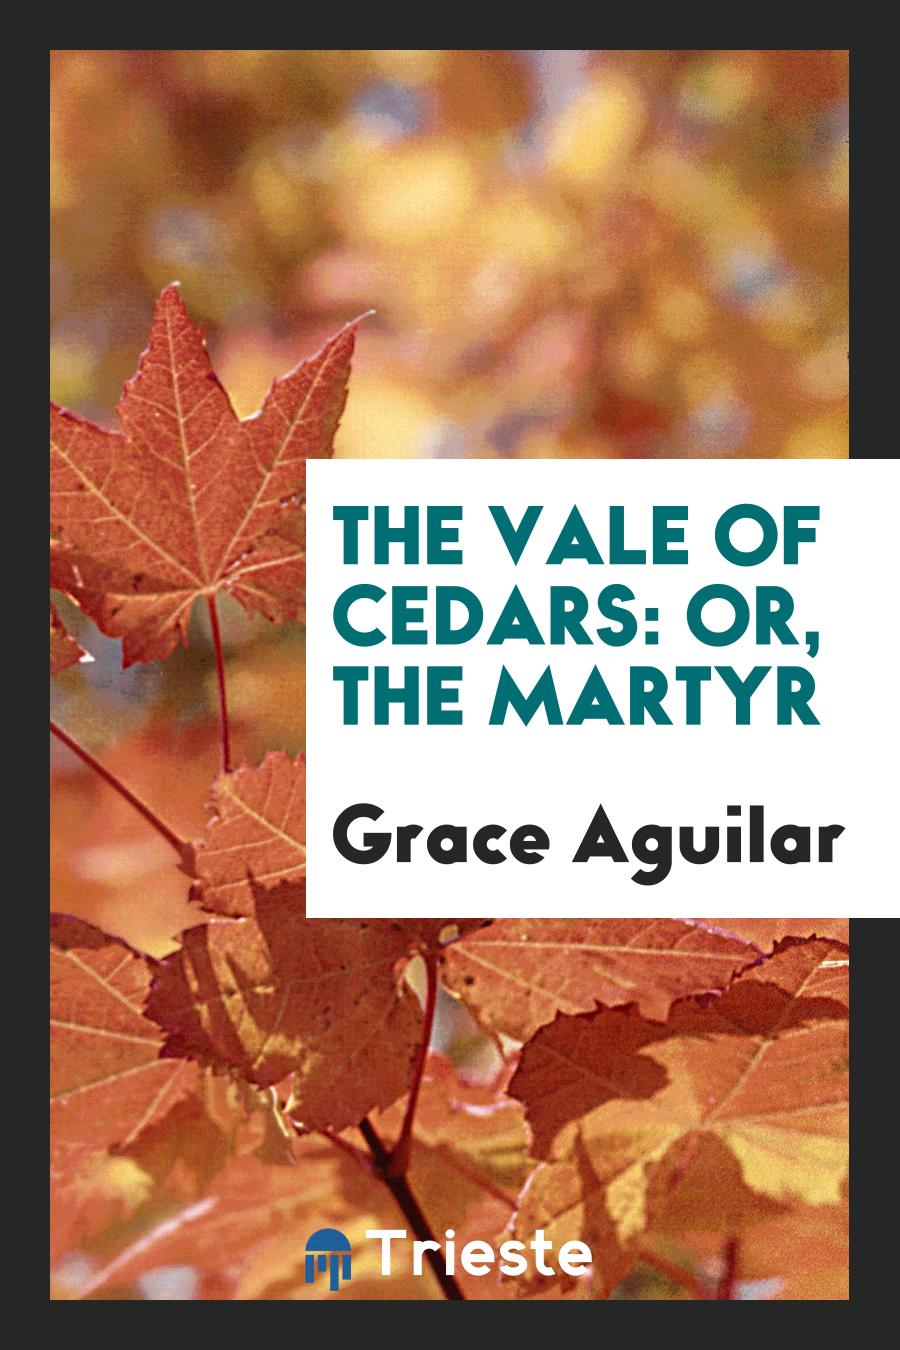 The Vale of Cedars: Or, The Martyr